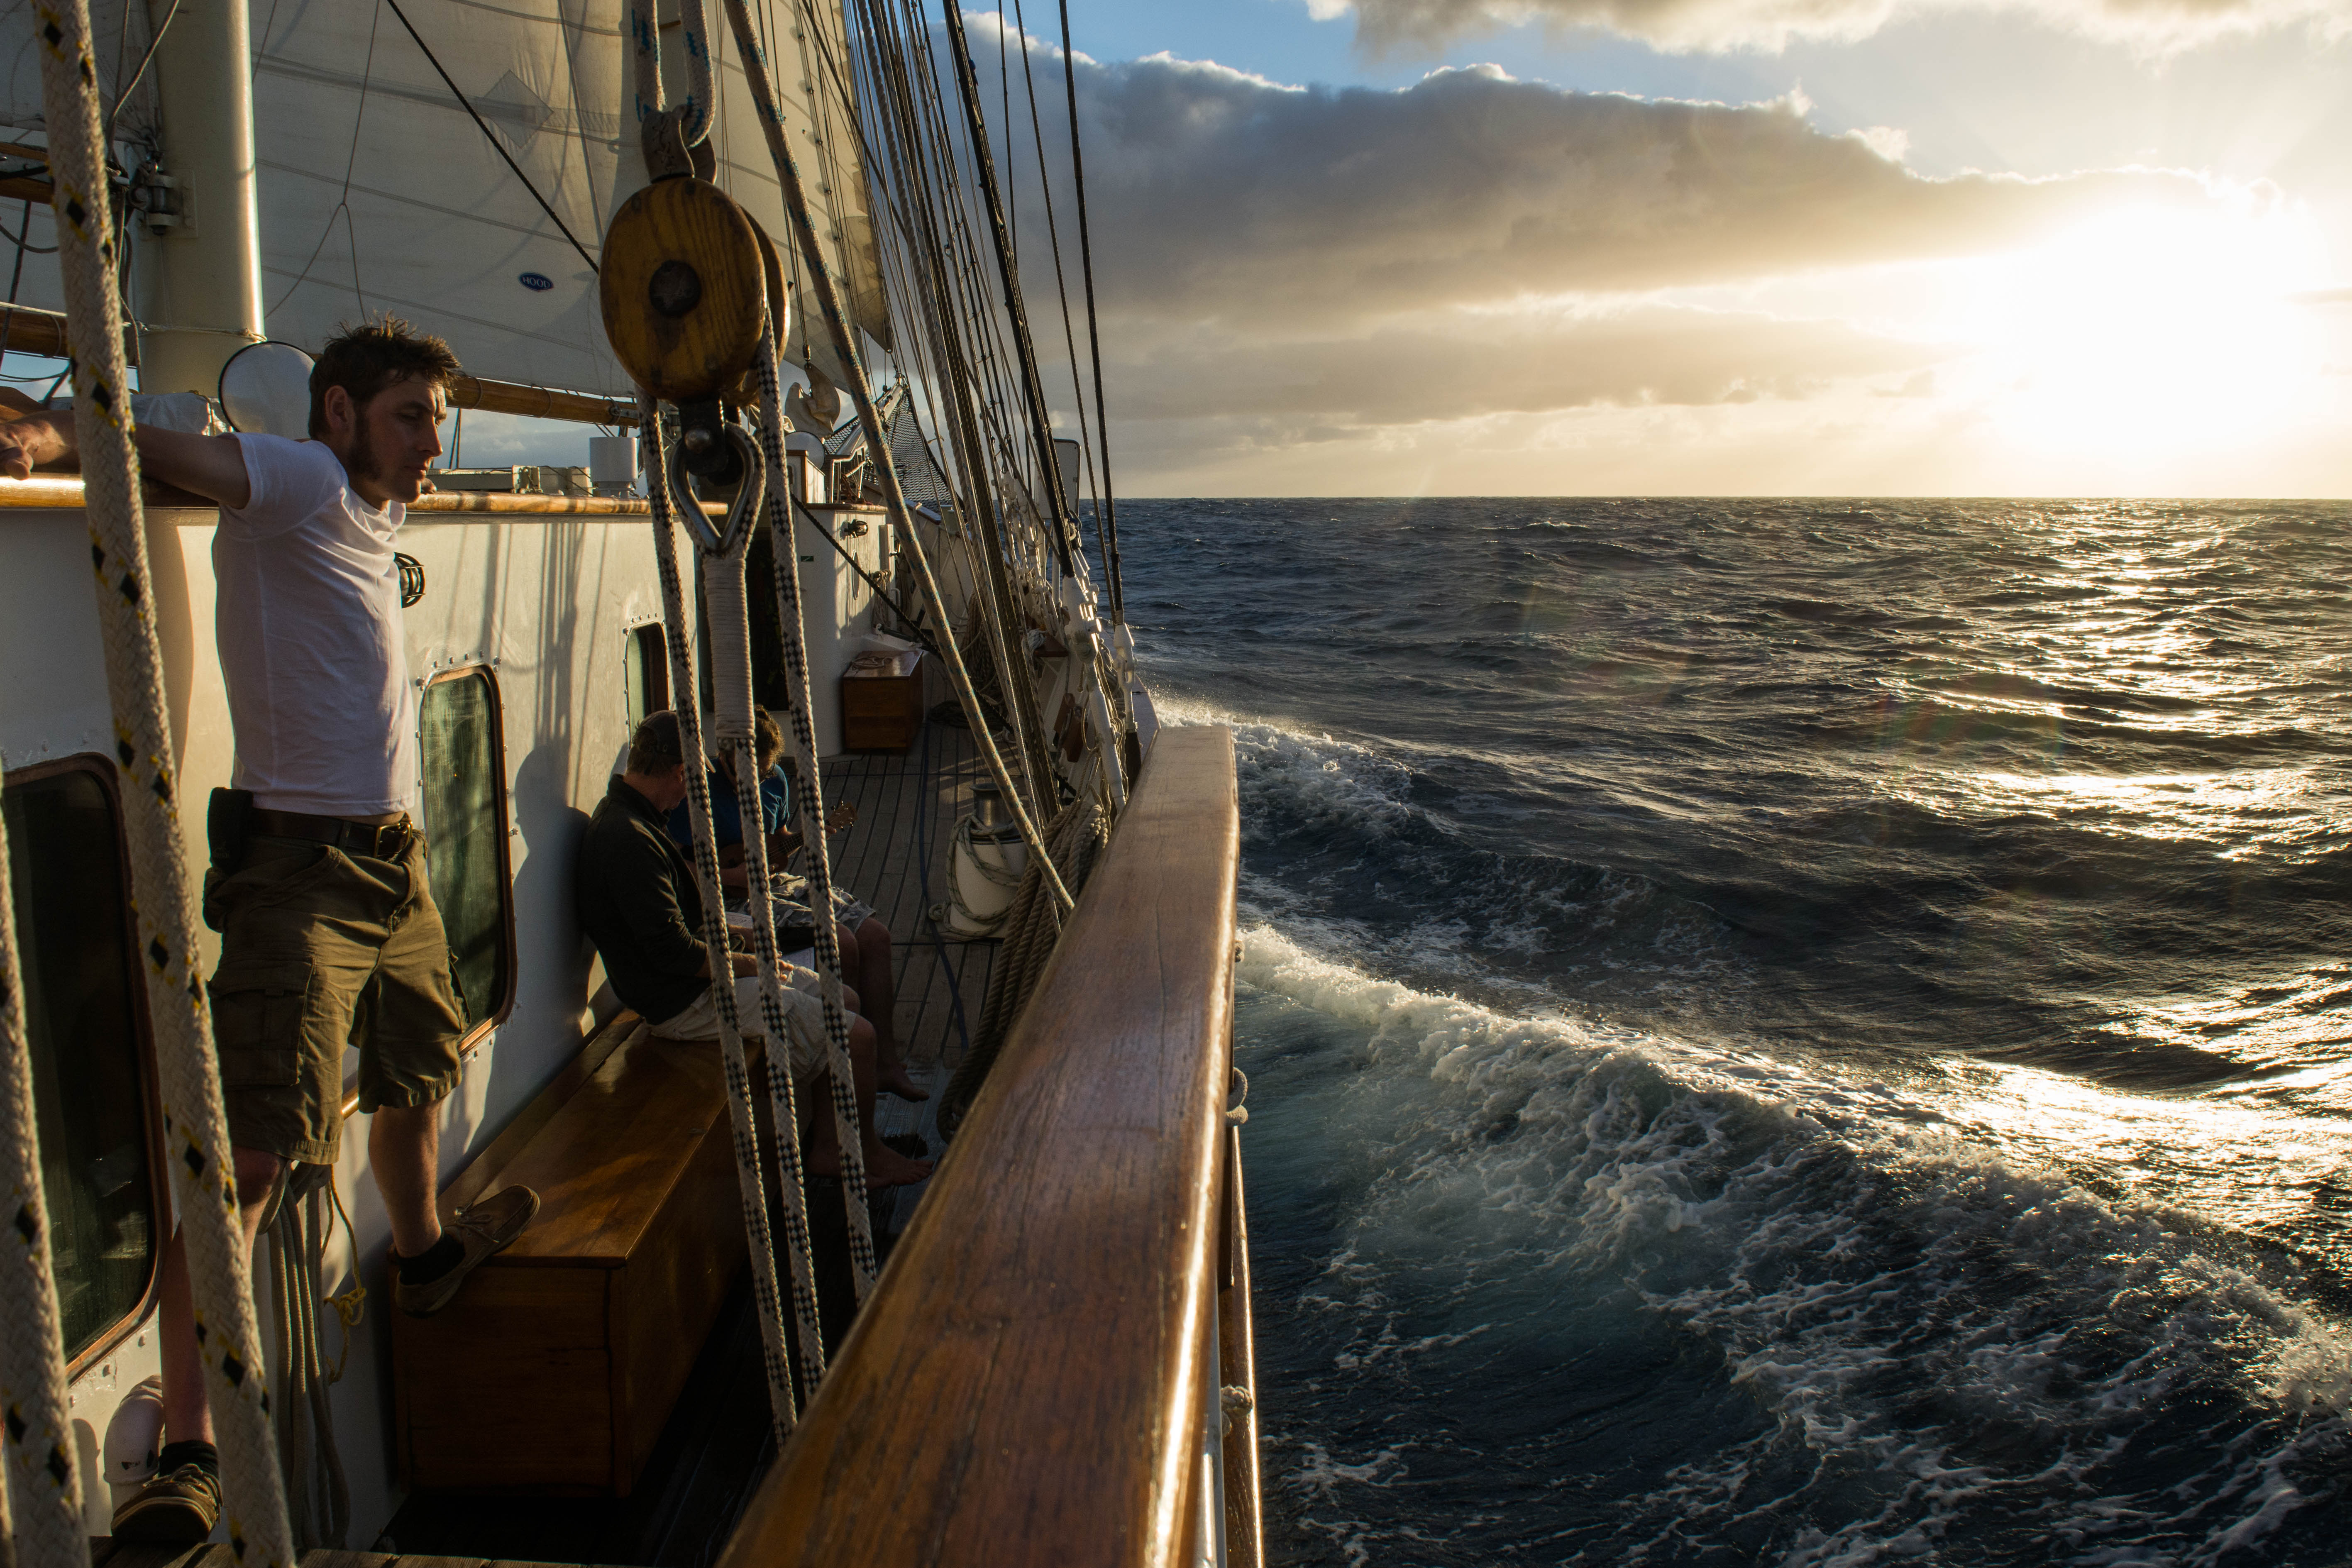 Blue Clipper under sail in the sunset at sea.